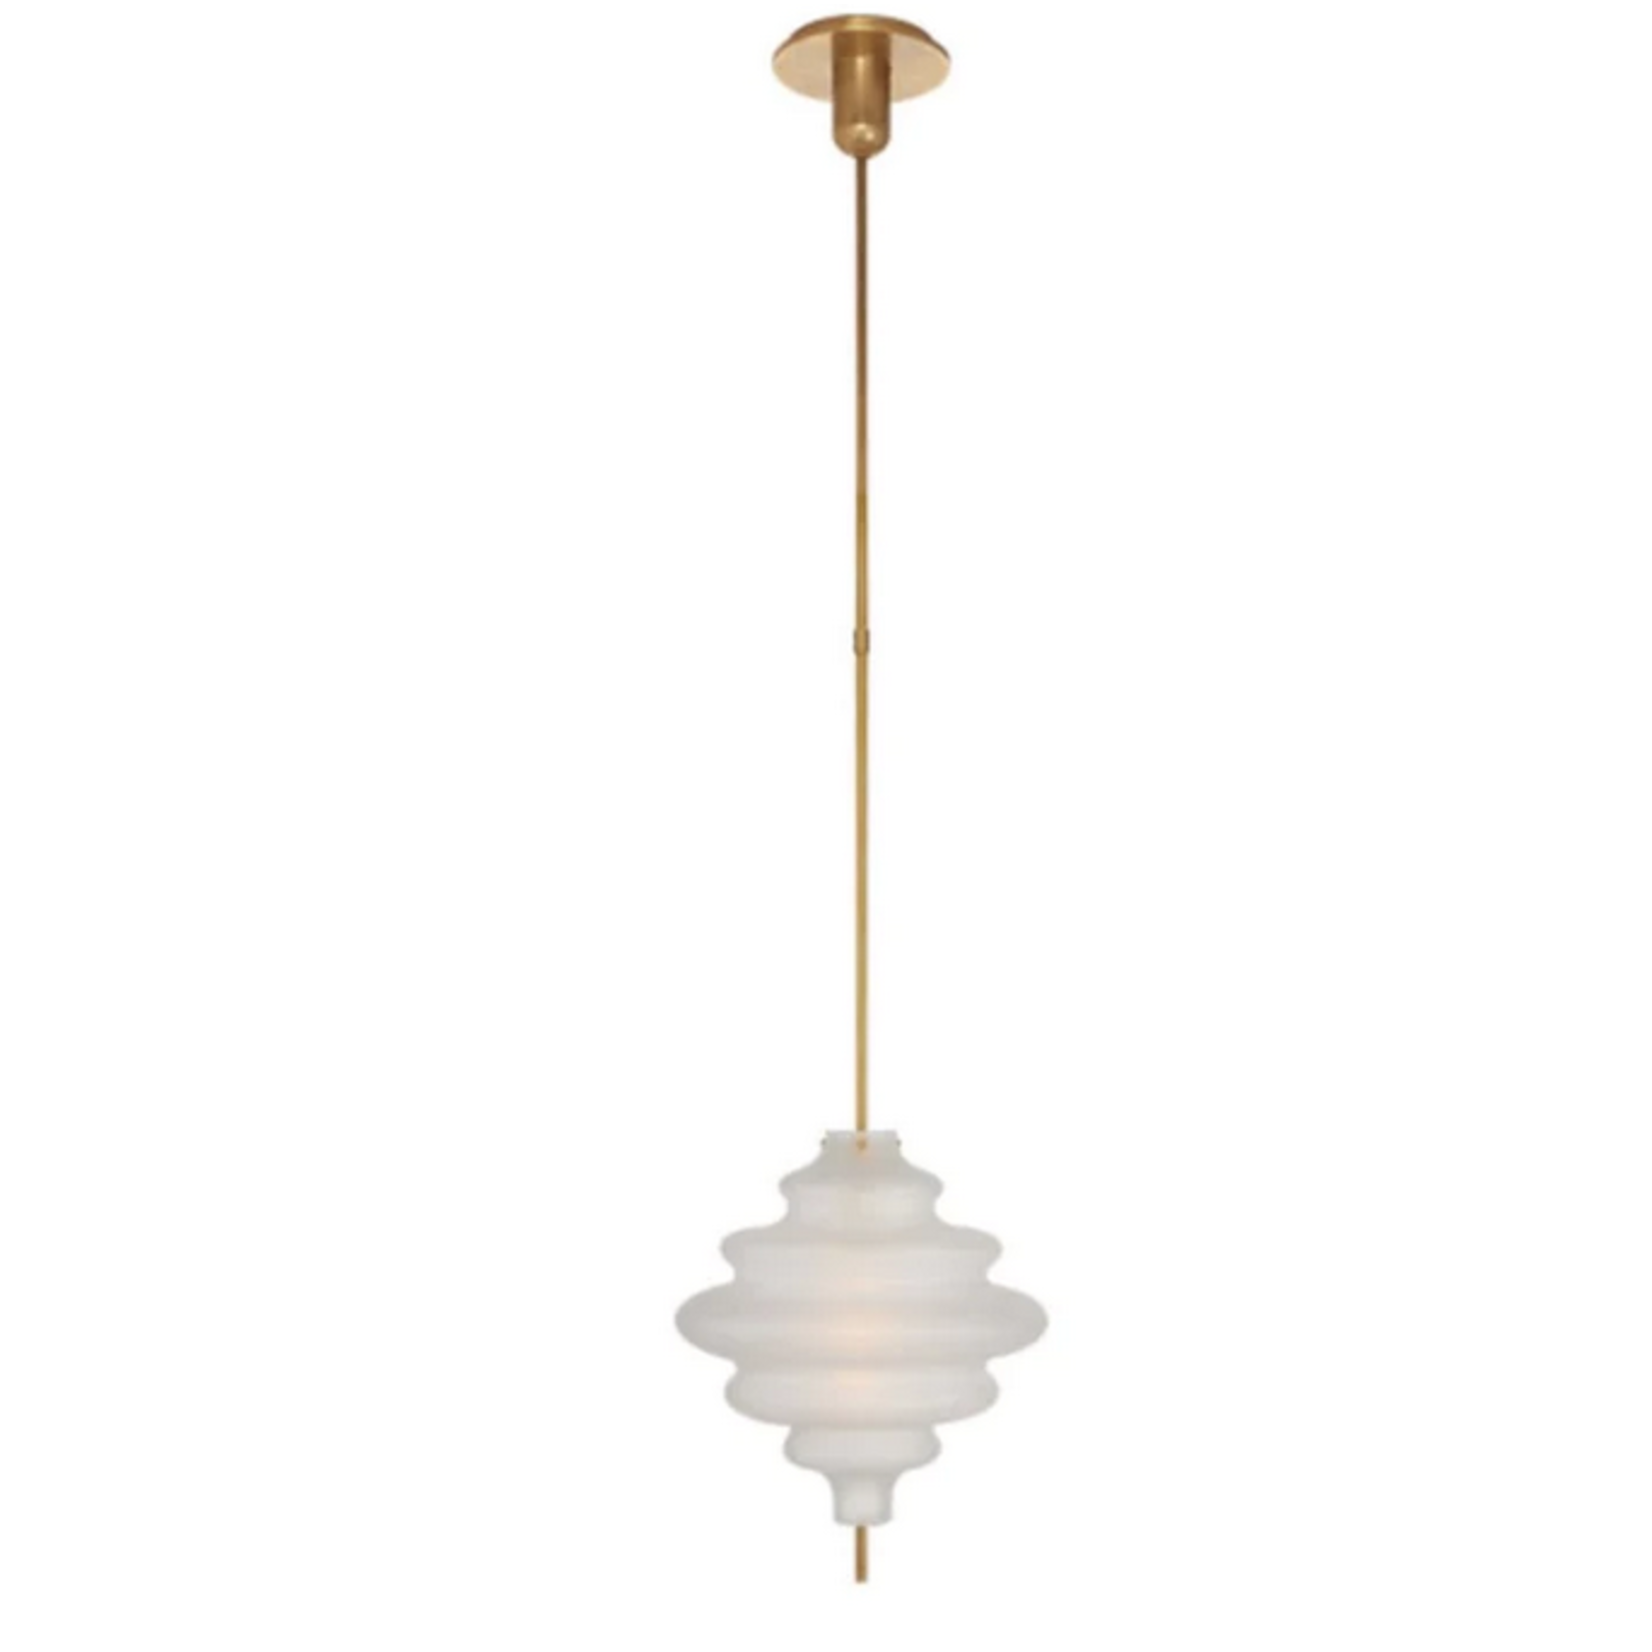 Tableau Small Pendant in Antique Burnished Brass by Kelly